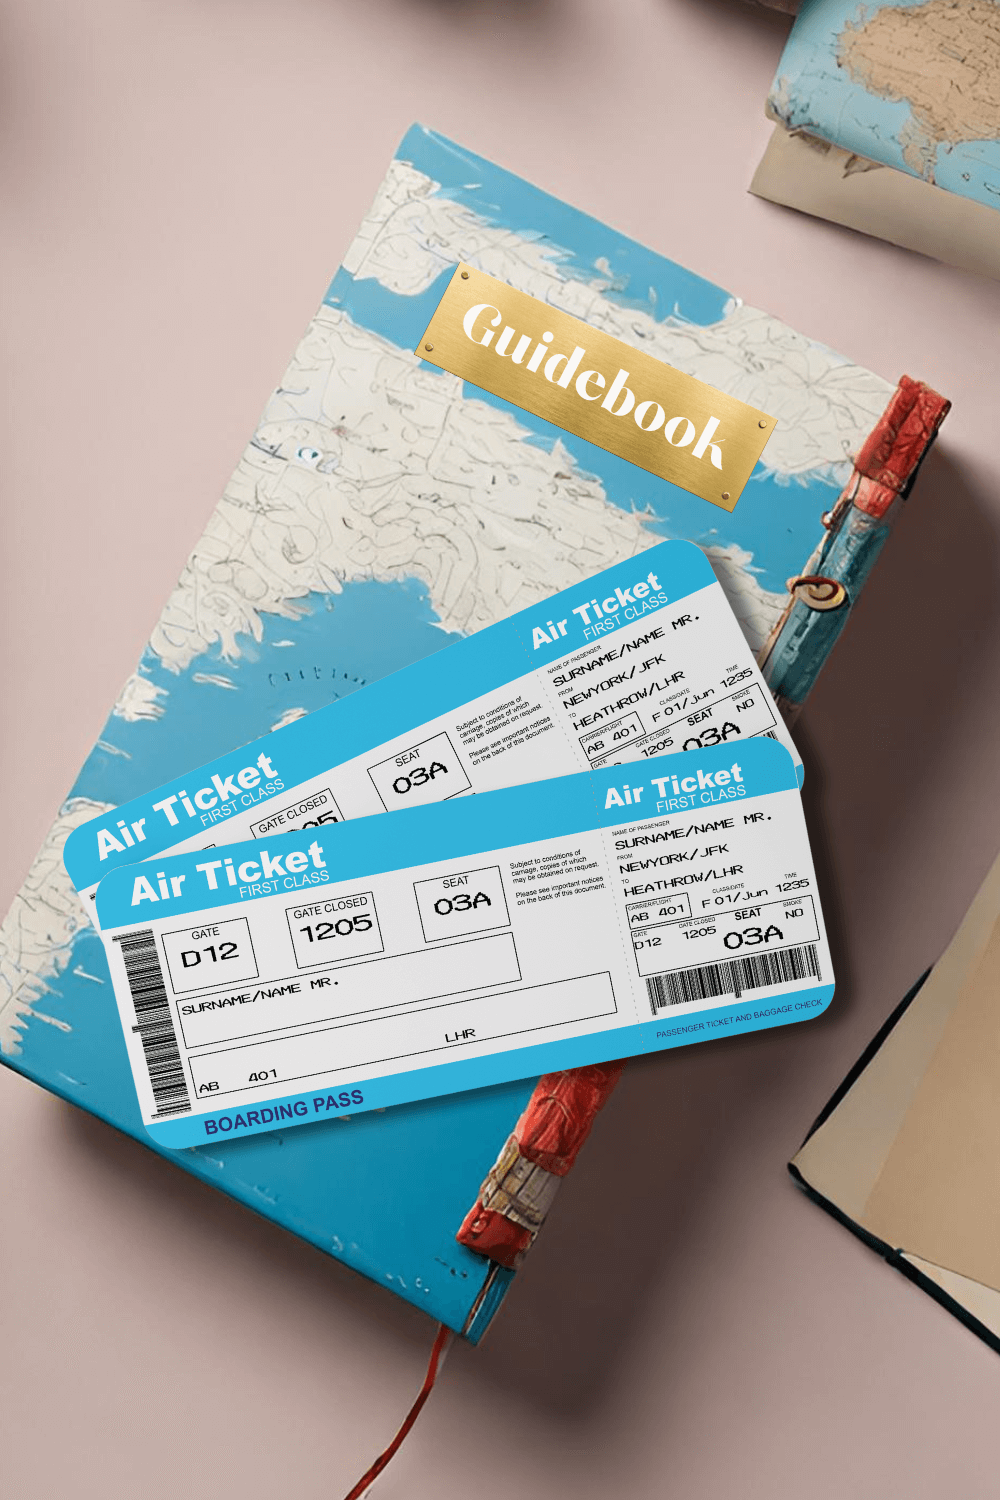 gift of travel ideas